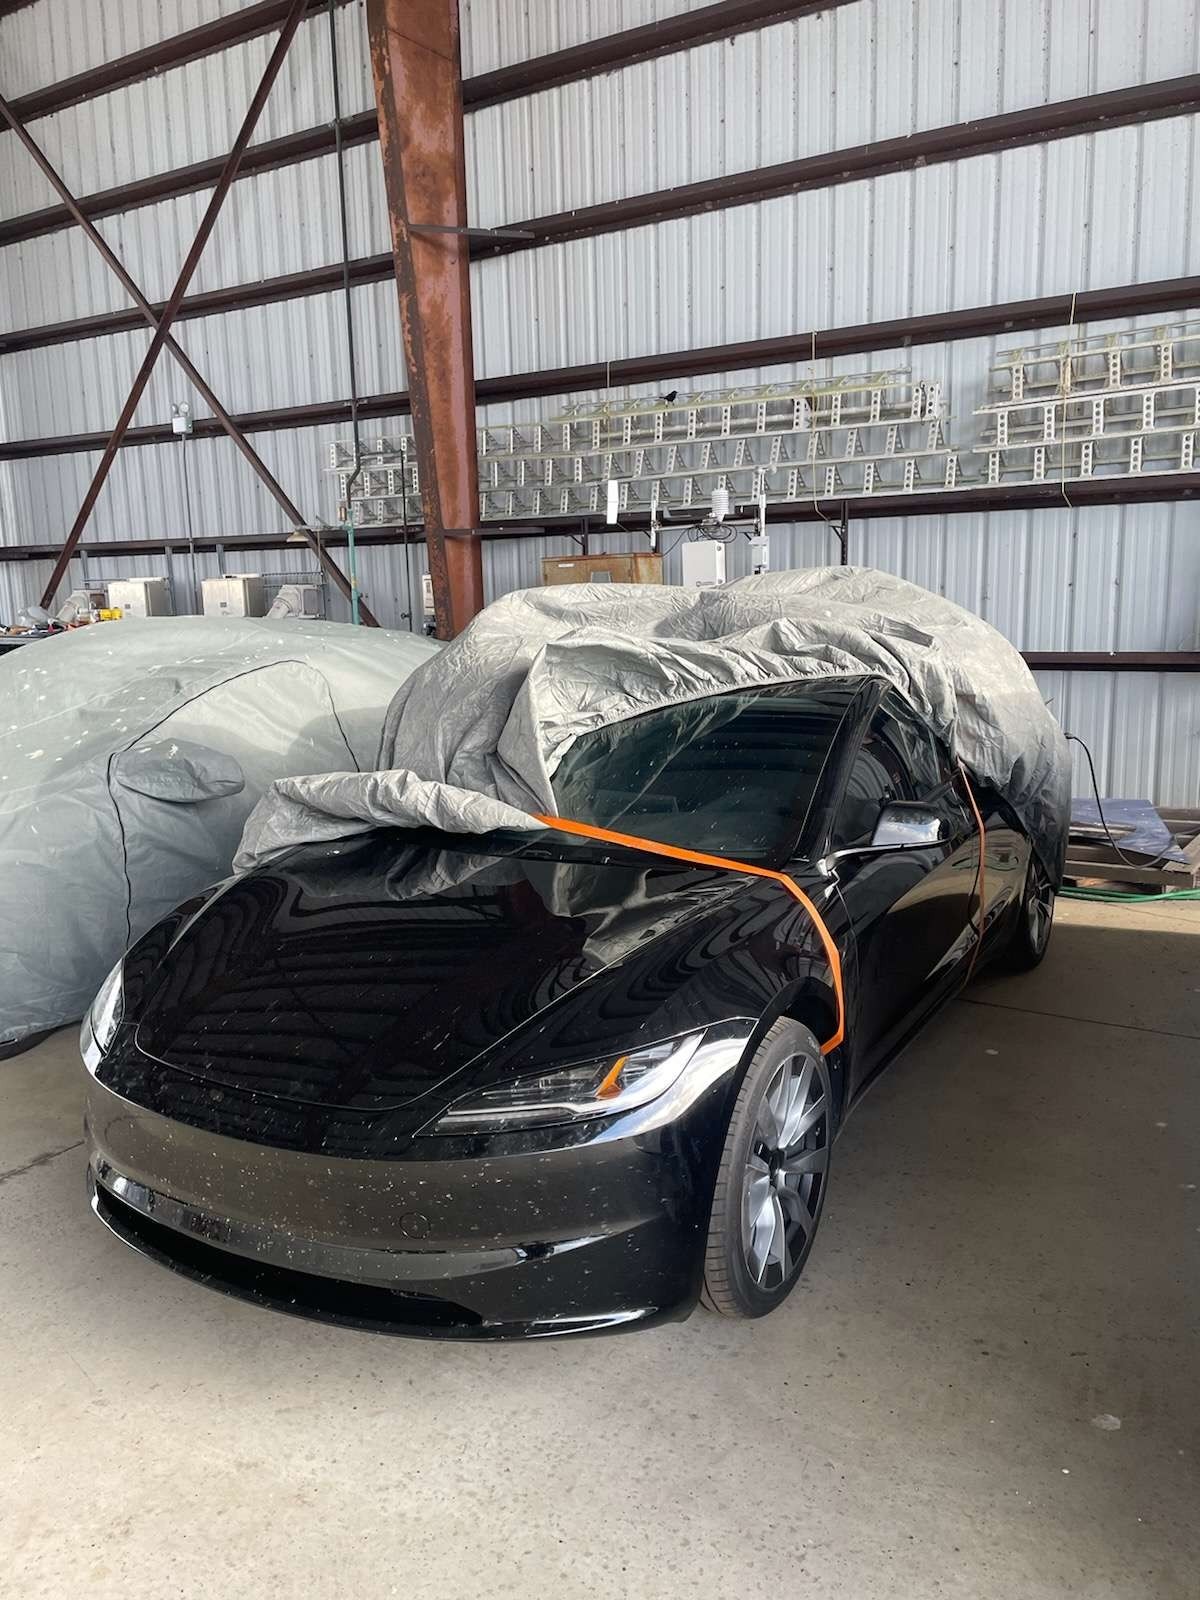 tesla-model-3-project-highland-first-picture-leaks-showing-streamlined-front-fascia